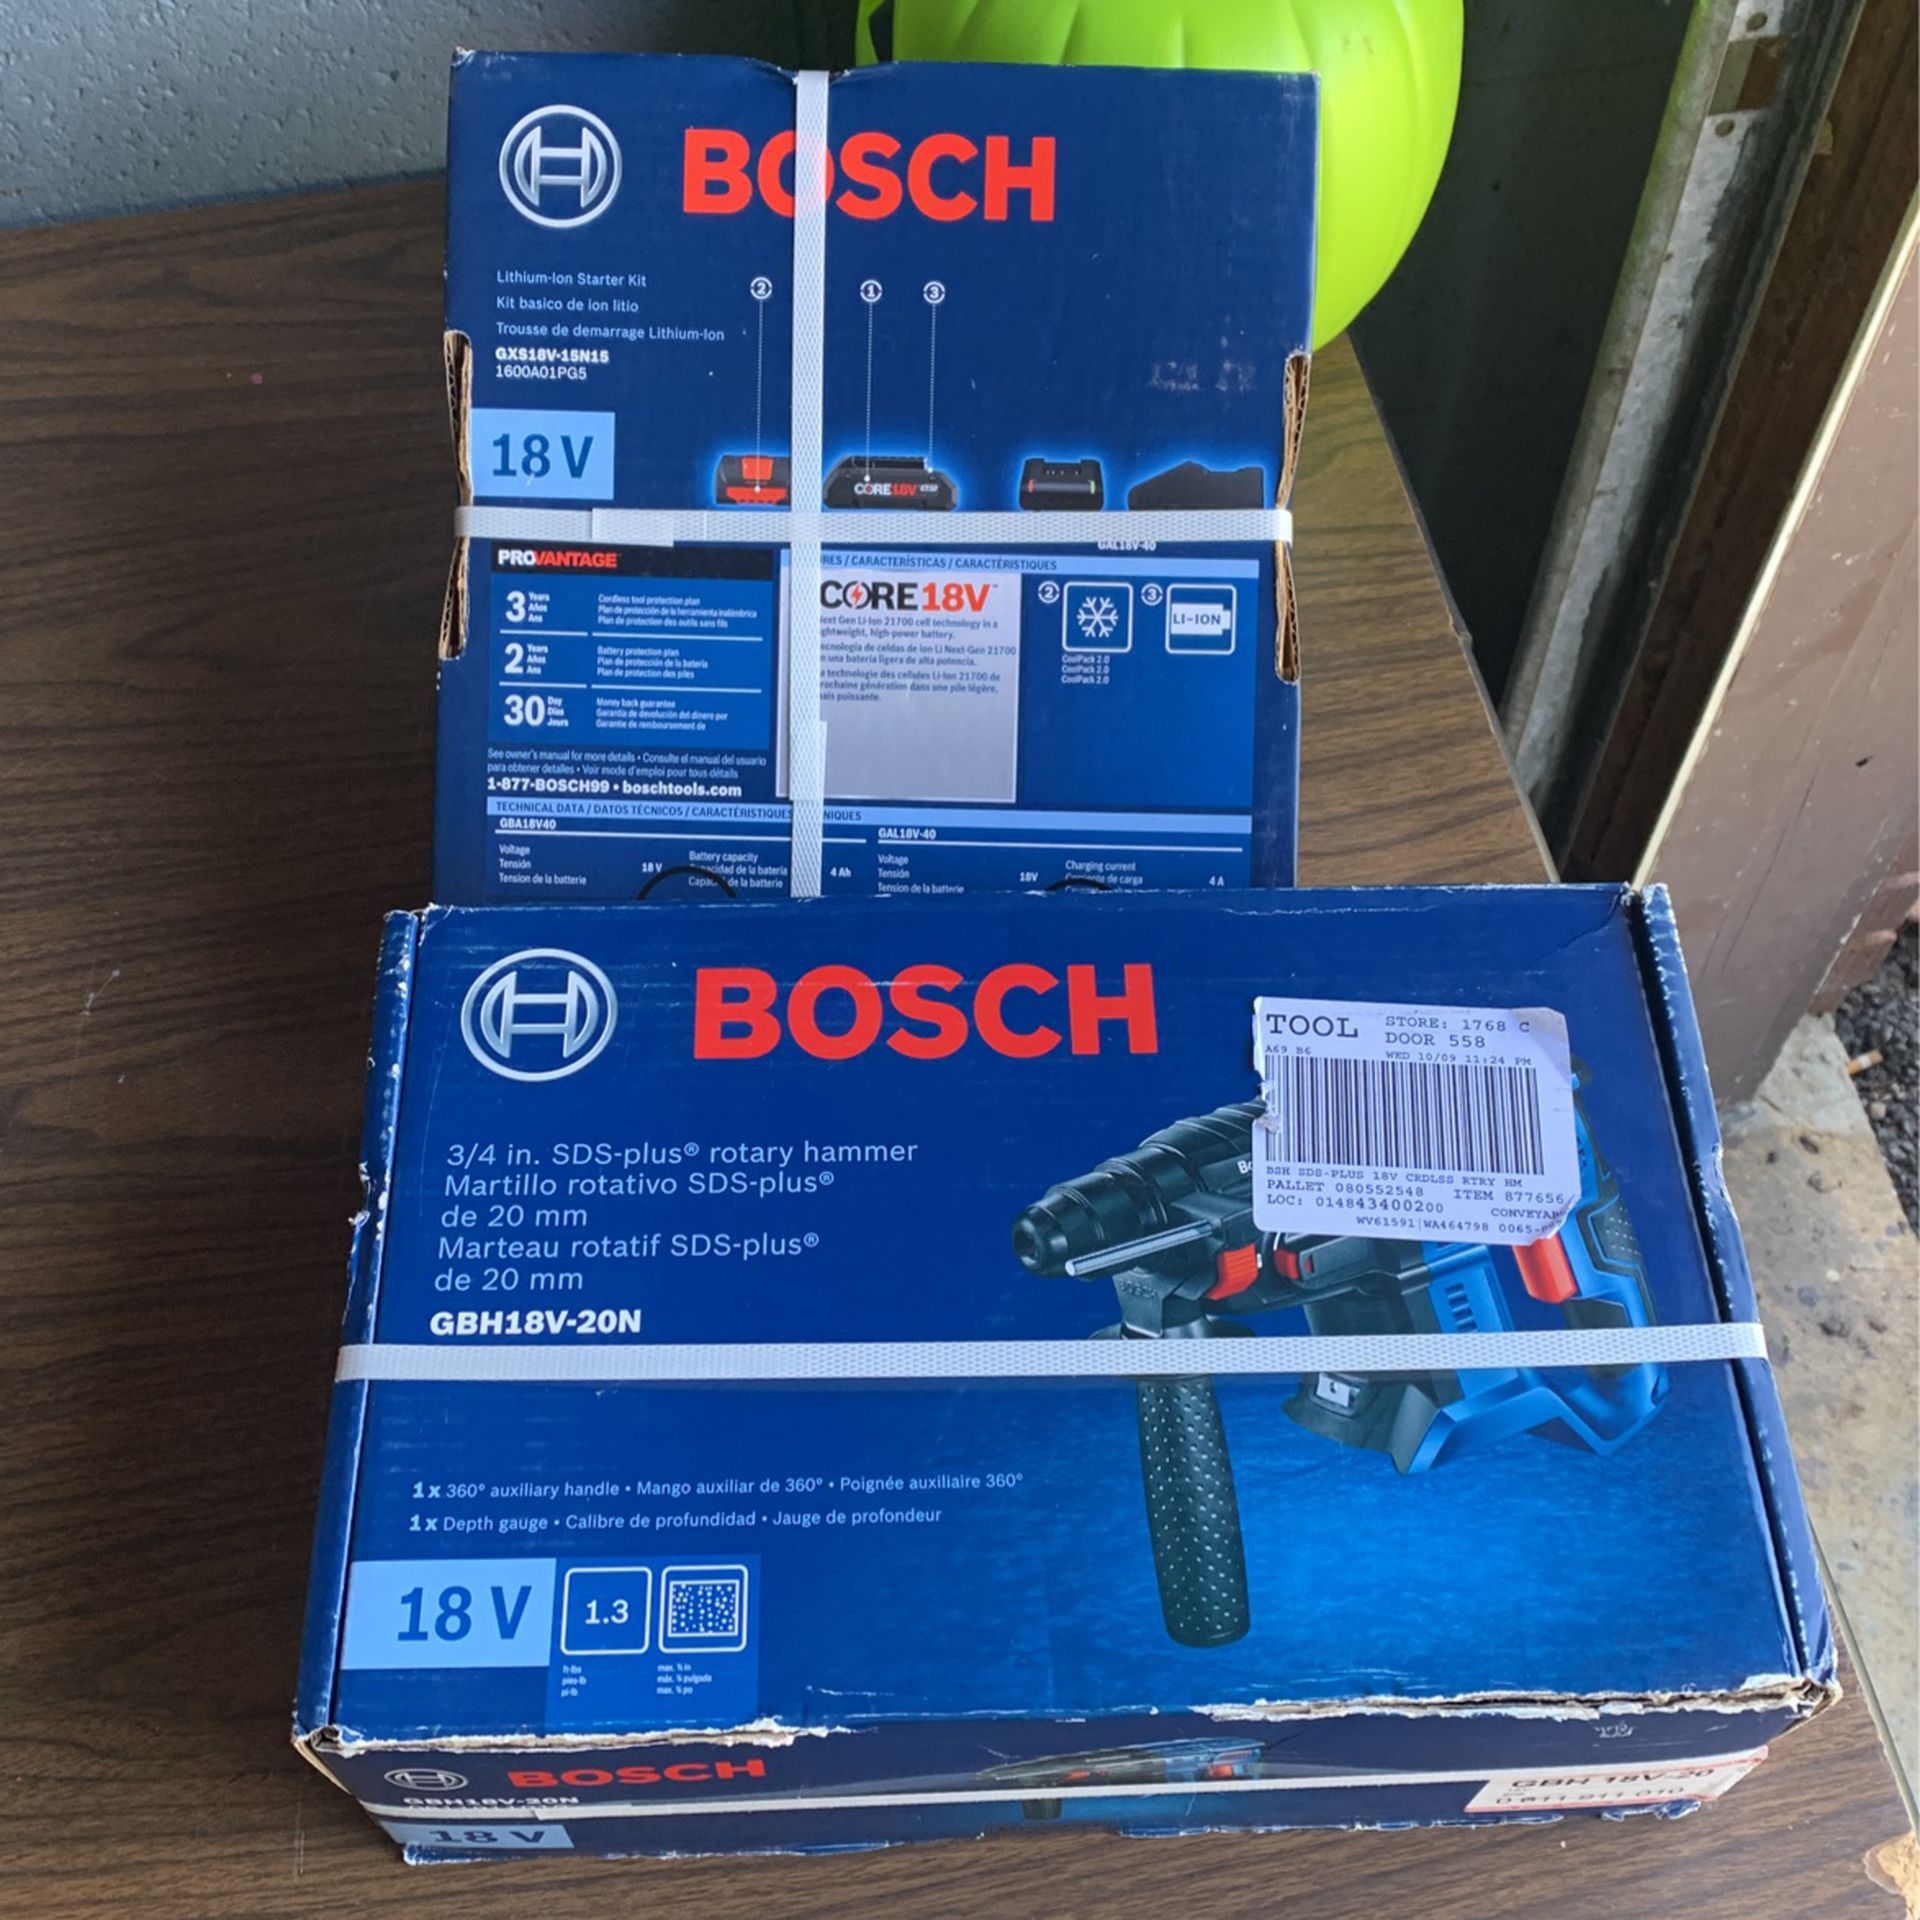 Bosch Sds-plus 3/4 Rotary Hammer And Lithium Ion Starter Kit